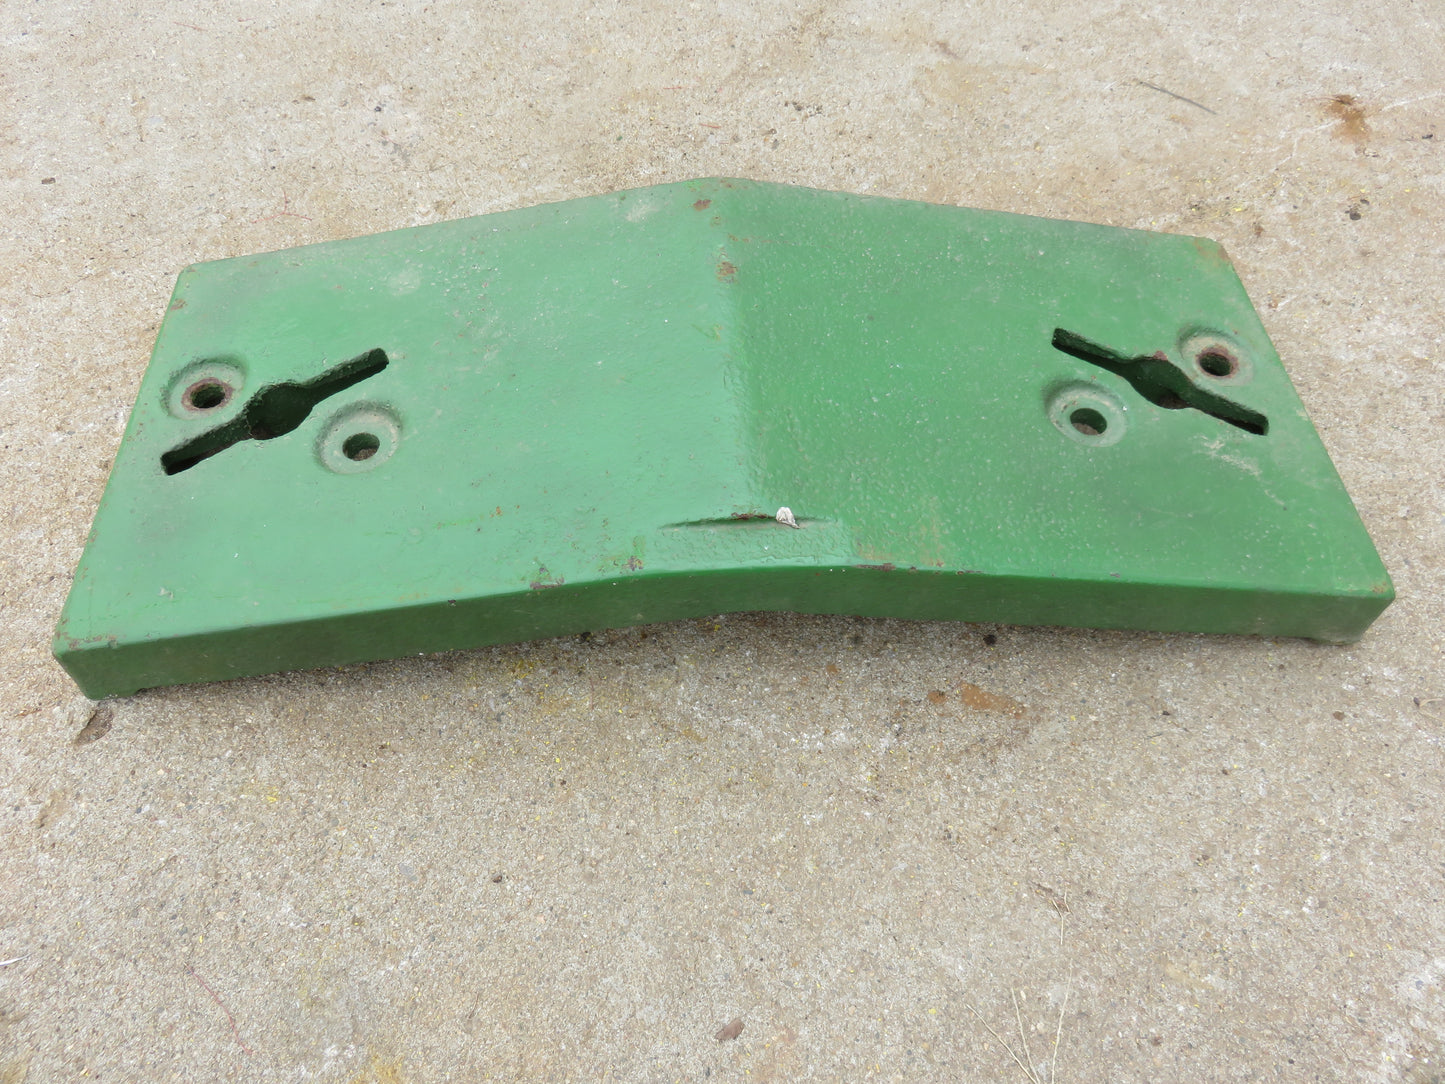 R27643 John Deere Front Weight For 820, 920, 1020, 1120, 1520, 2010, 2020, 2030, 2120